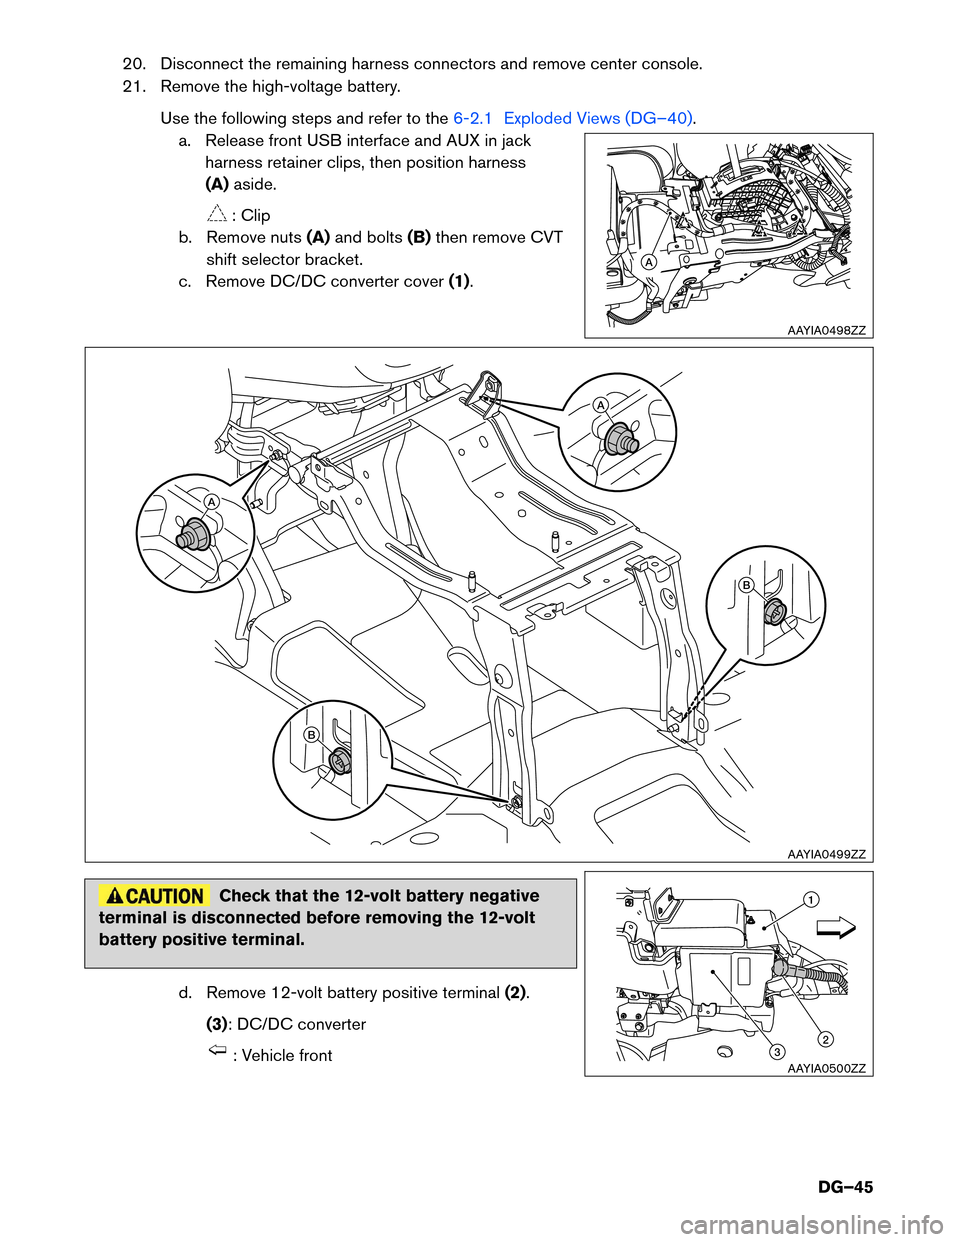 NISSAN MURANO HYBRID 2016 3.G Dismantling Guide 20. Disconnect the remaining harness connectors and remove center console.
21.
Remove the high-voltage battery.
Use the following steps and refer to the 6-2.1 Exploded Views (DG–40).
a.

Release fro